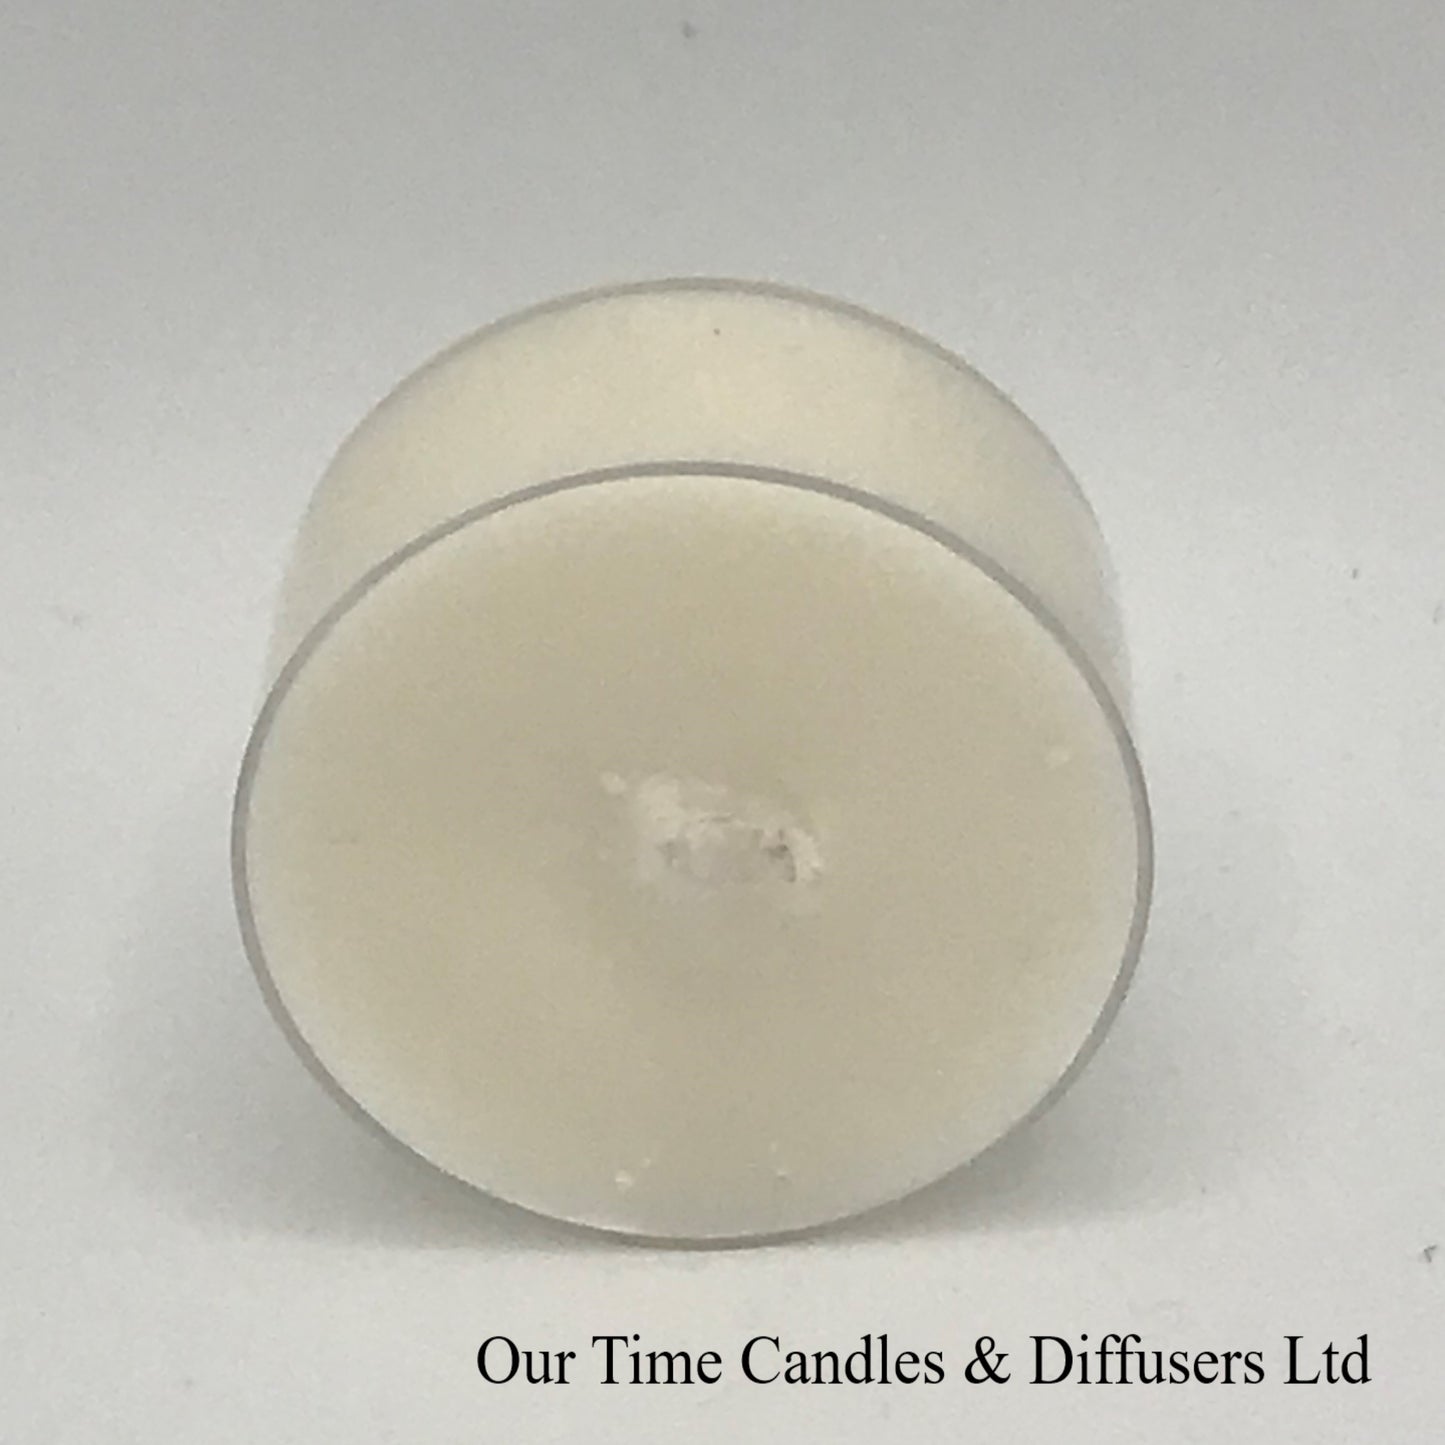 Premium Soy Tealight unscented from Our Time Candles and Diffusers